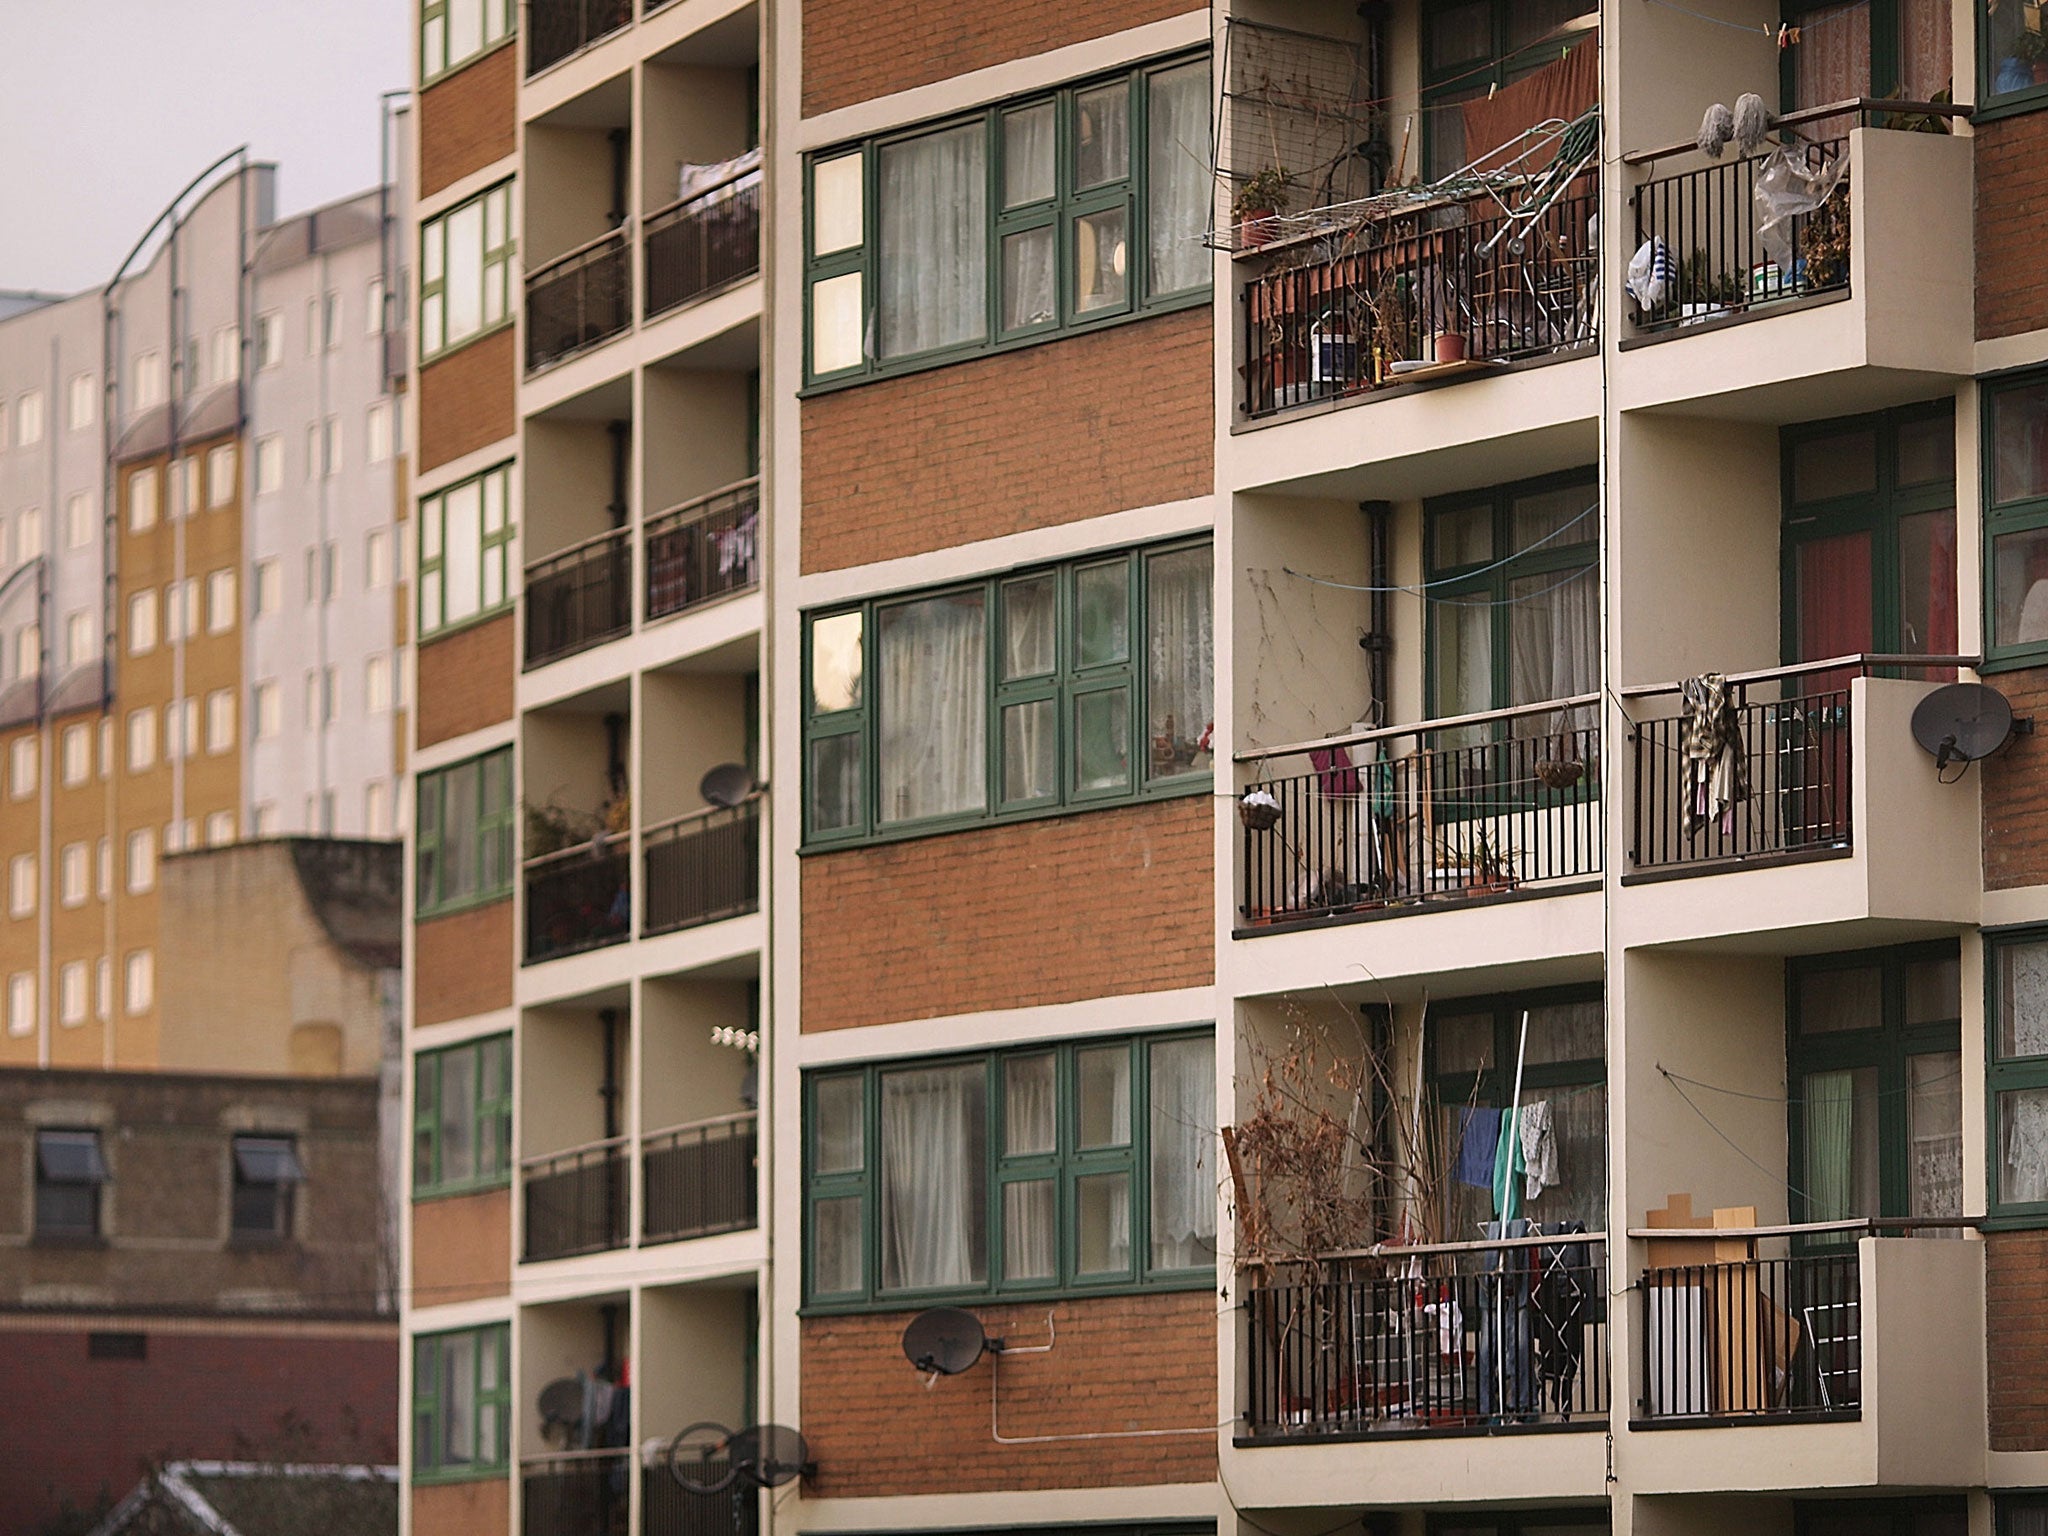 Housing authorities have reported large numbers of tenants simply unable to pay the extra rent